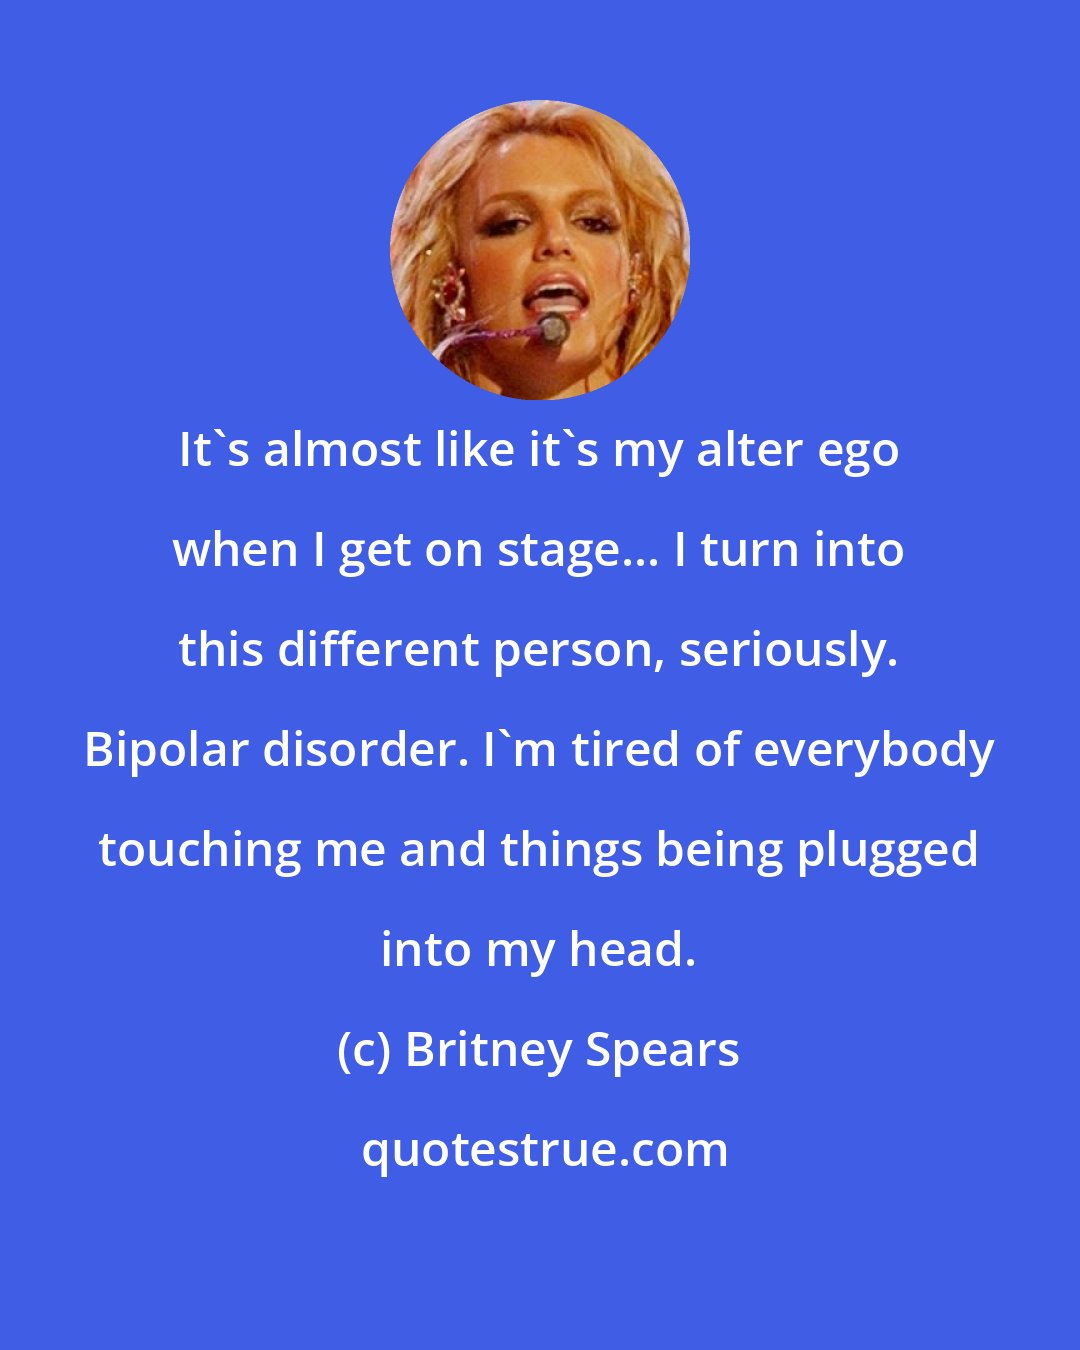 Britney Spears: It's almost like it's my alter ego when I get on stage... I turn into this different person, seriously. Bipolar disorder. I'm tired of everybody touching me and things being plugged into my head.